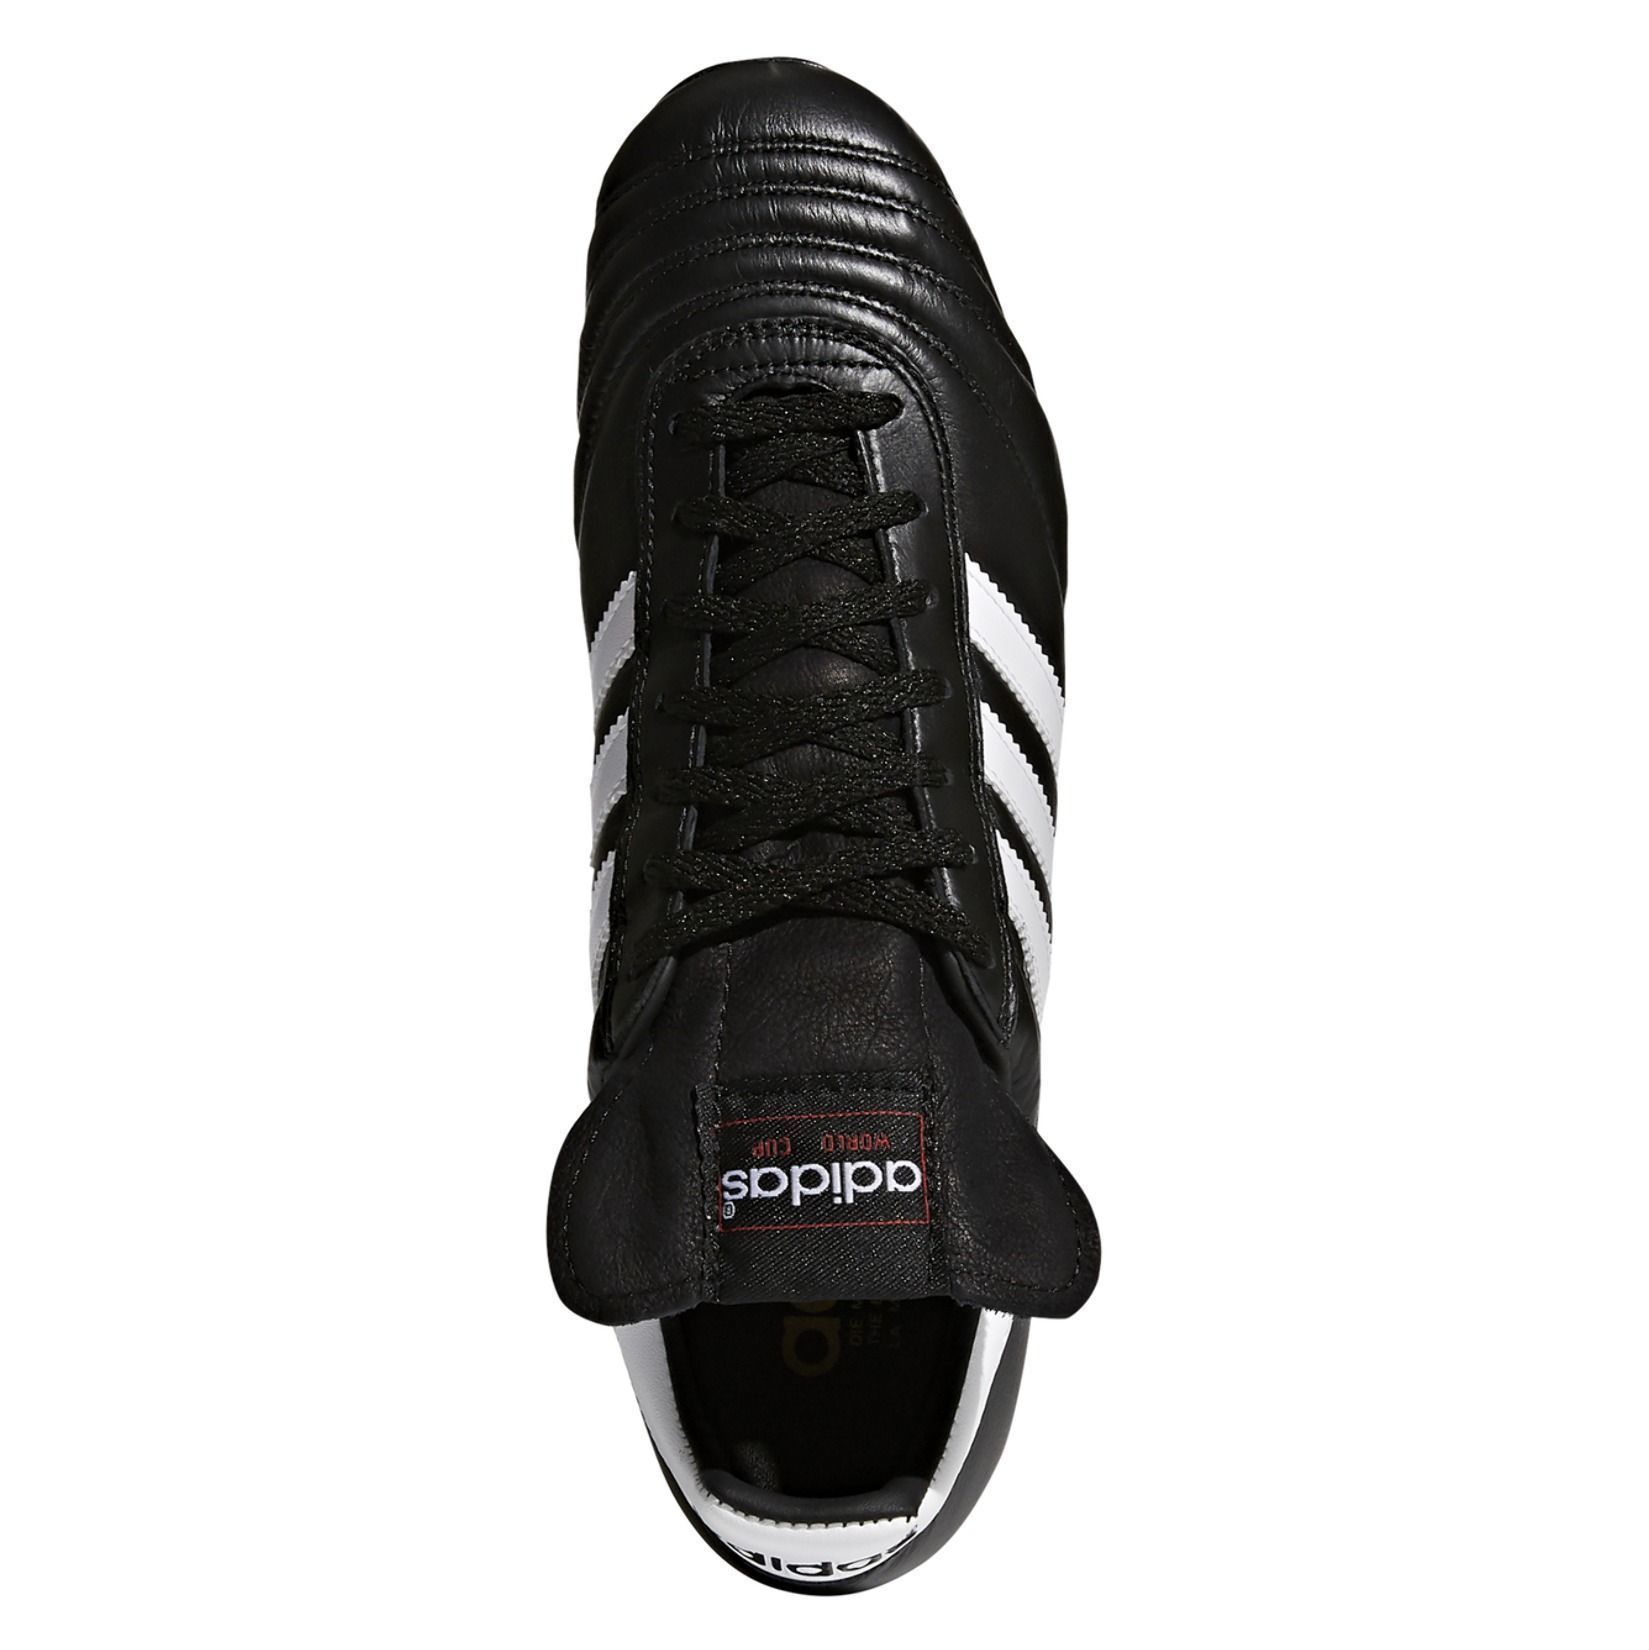 Adidas-LP World Cup Boots